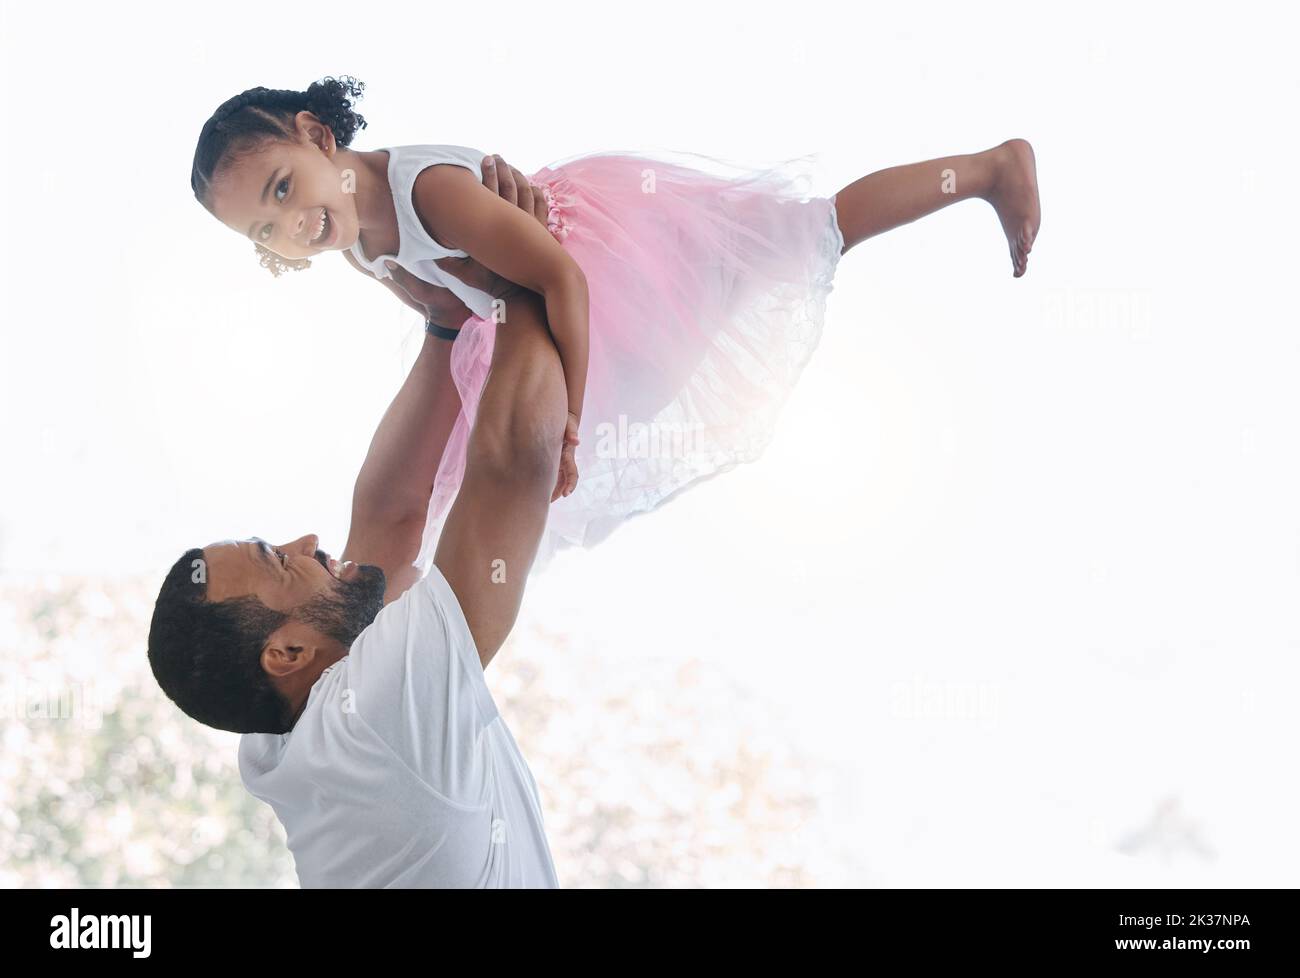 Family, dad and ballet girl happy and joyful with parent holding her in air for play time together. Trust, love and respect in childhood bond with Stock Photo